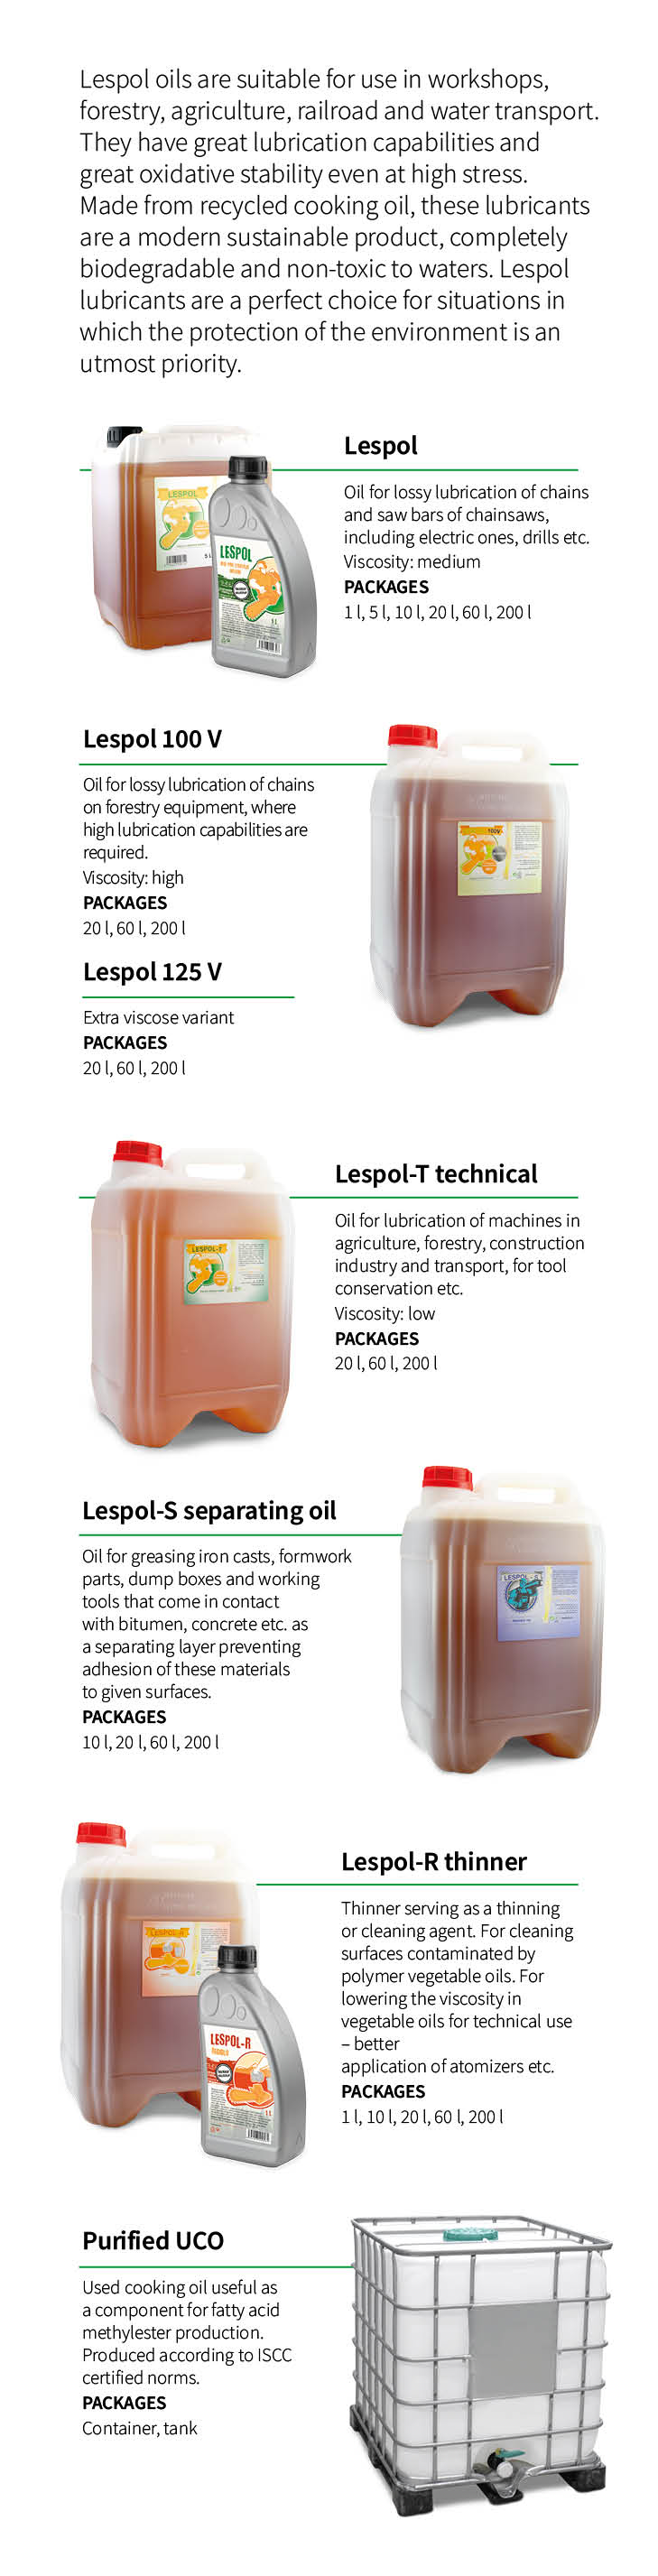 Oils for technical use, oil recycling